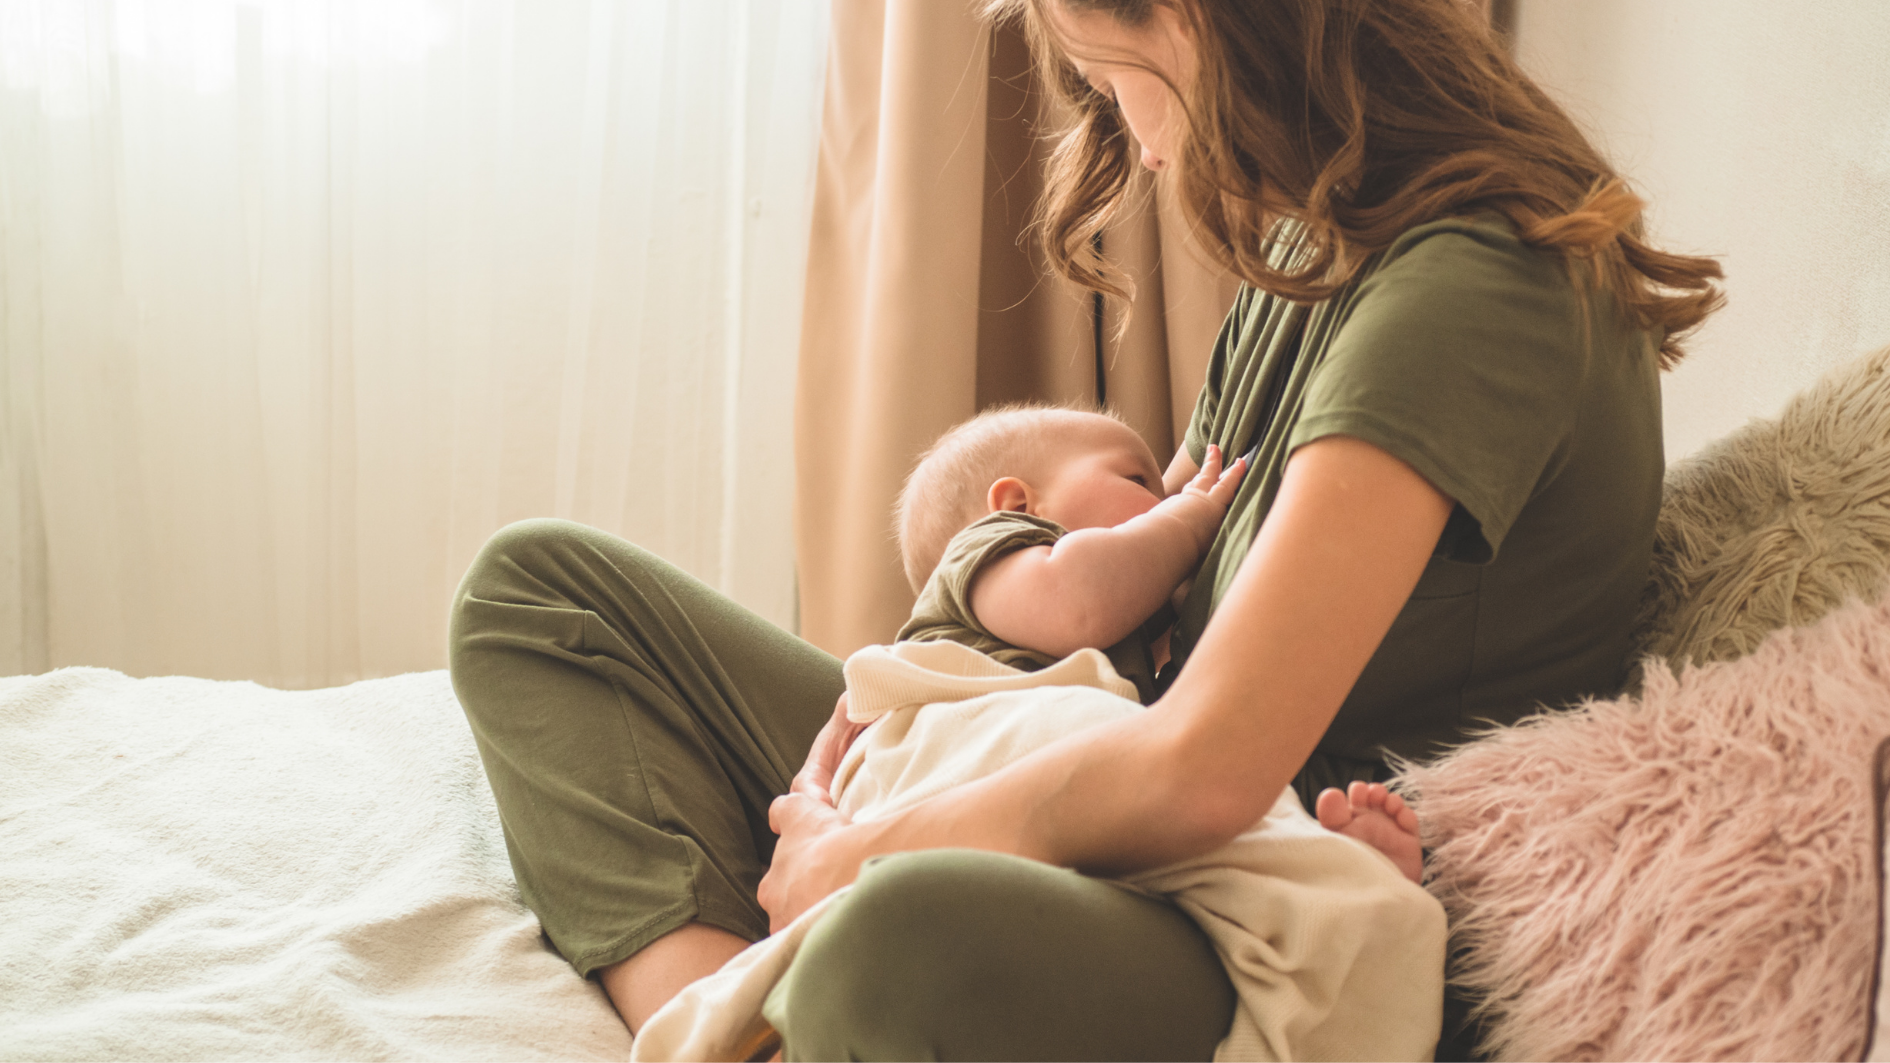 AAP Update Recommends Breastfeeding For 2 Years or More